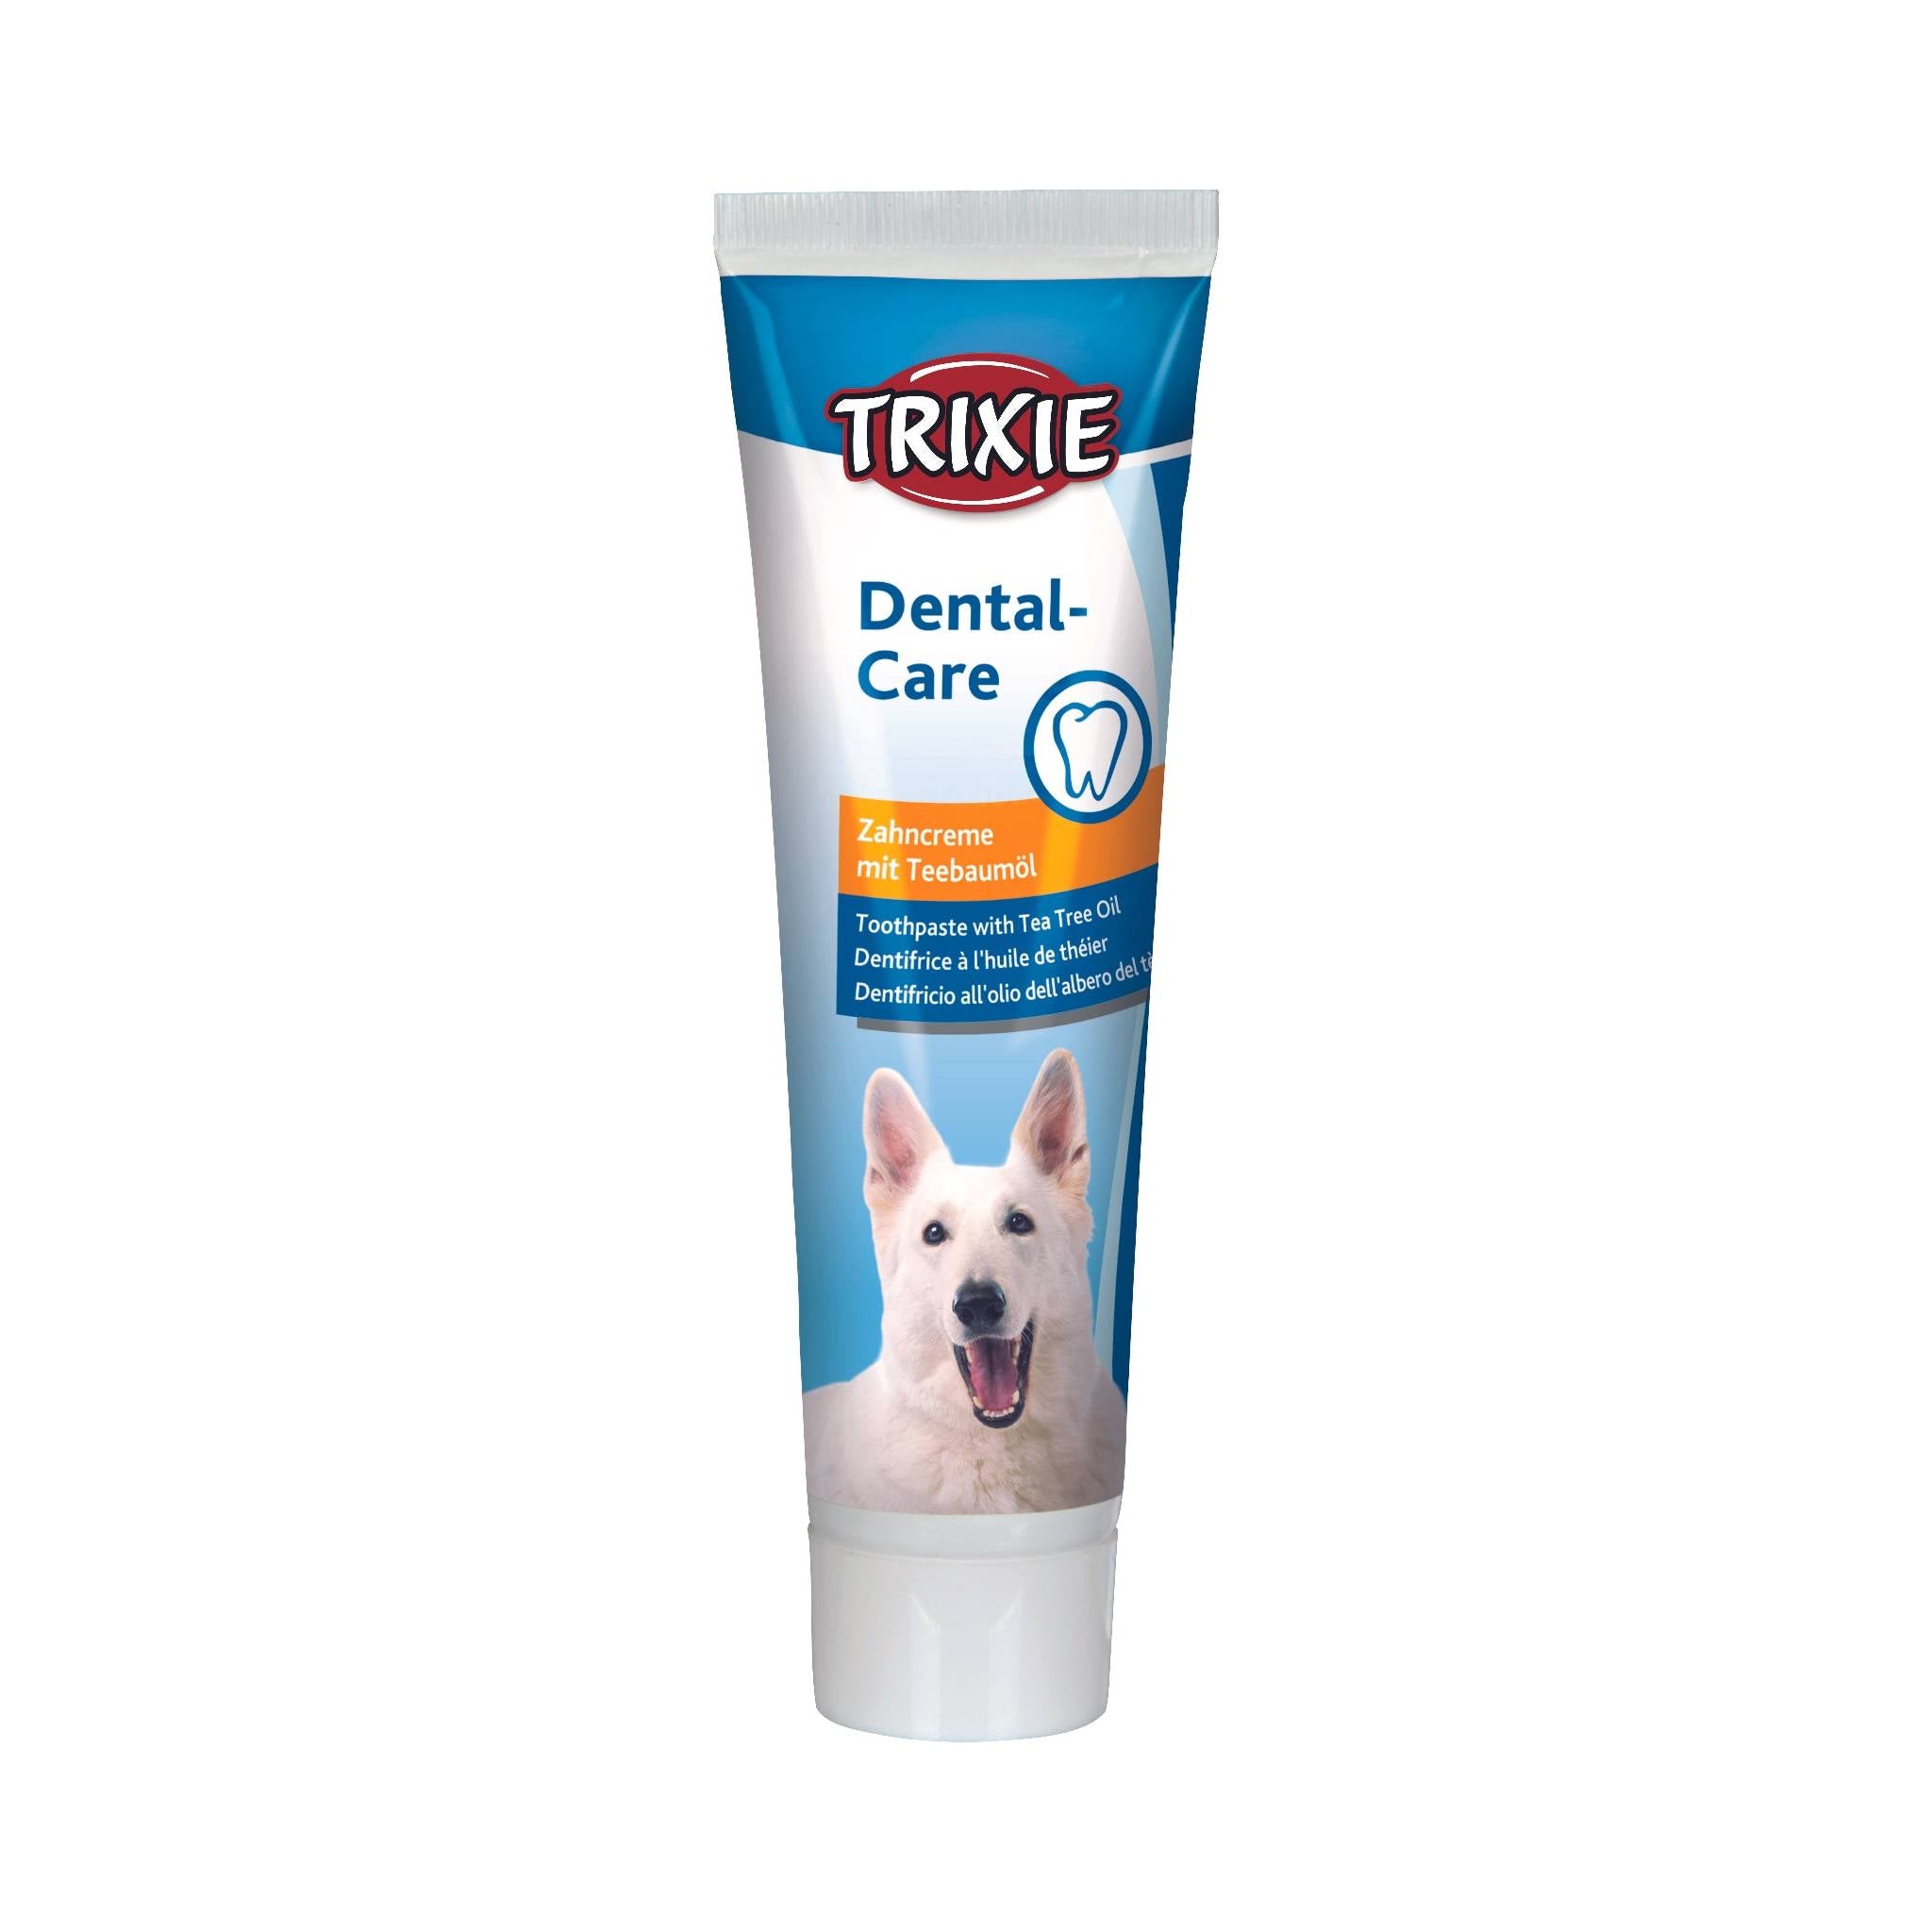 Trixie Dog Toothpaste with Tea Tree Oil - Pack of 2